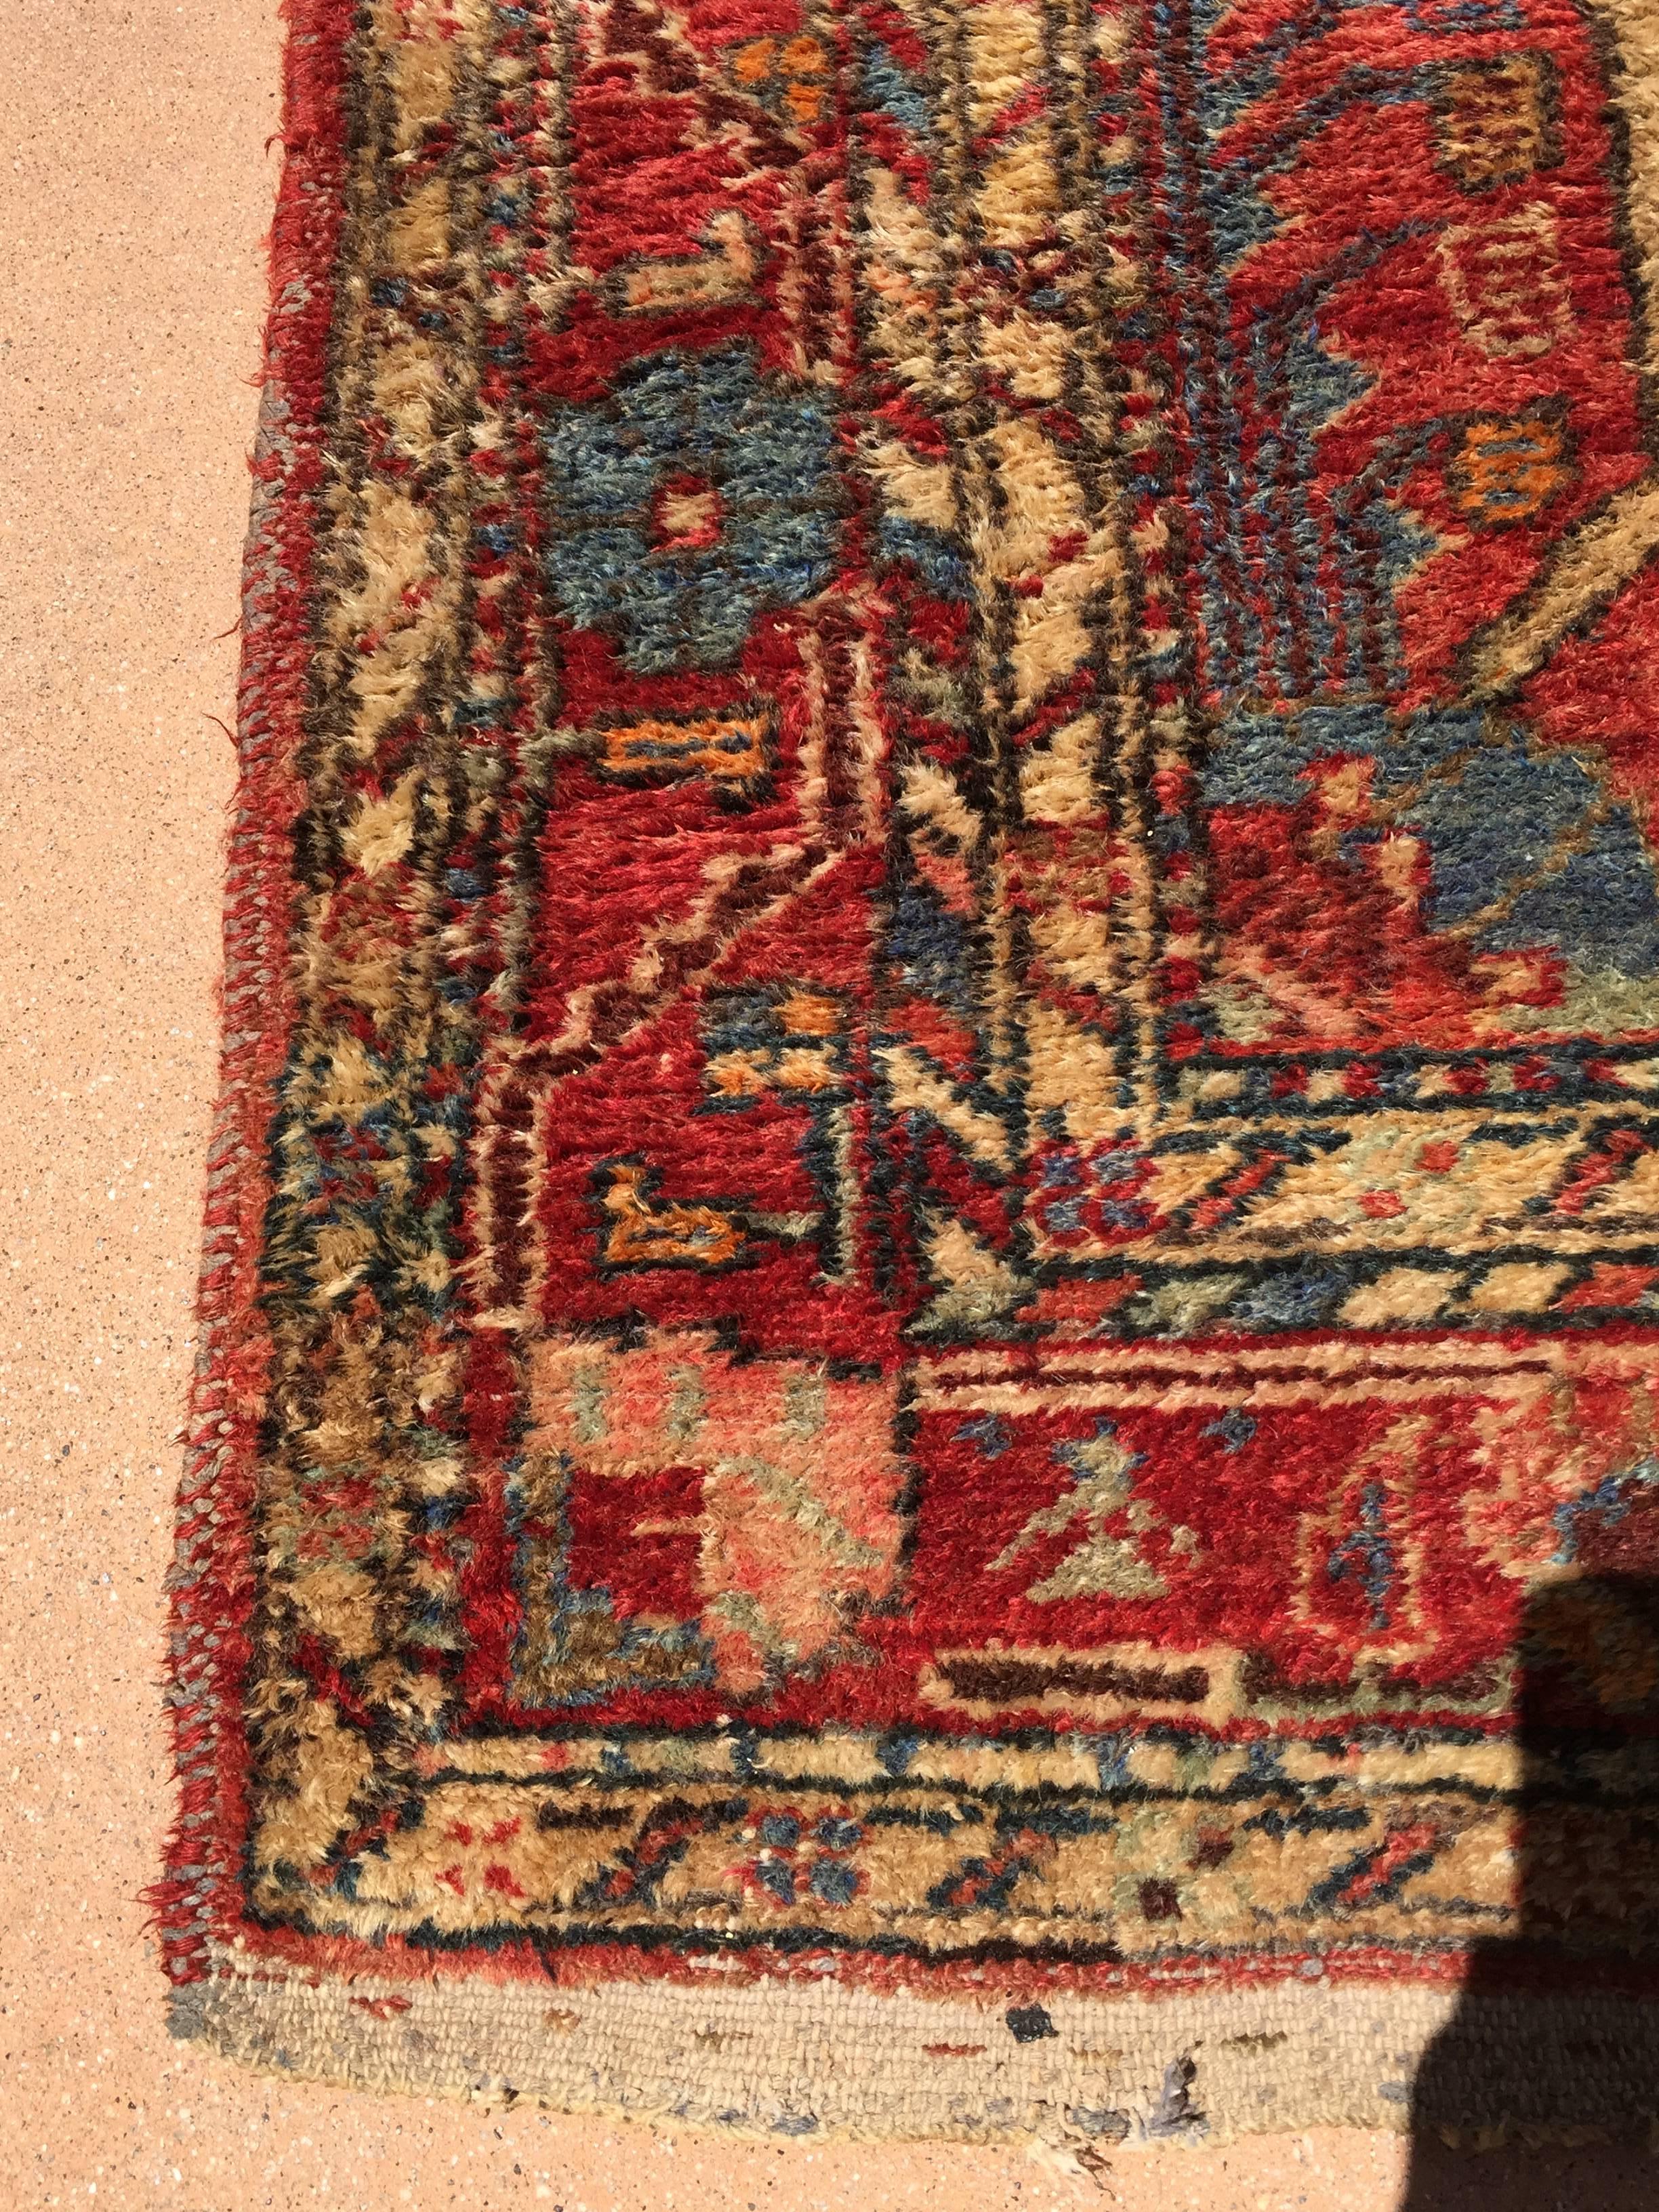 Small hand-knotted rug from Eastern Turkey,
circa 1940.
Size: 3ft 9 in x 6ft 5in.
Traditional Turkish design and colors.
Small pile rug.